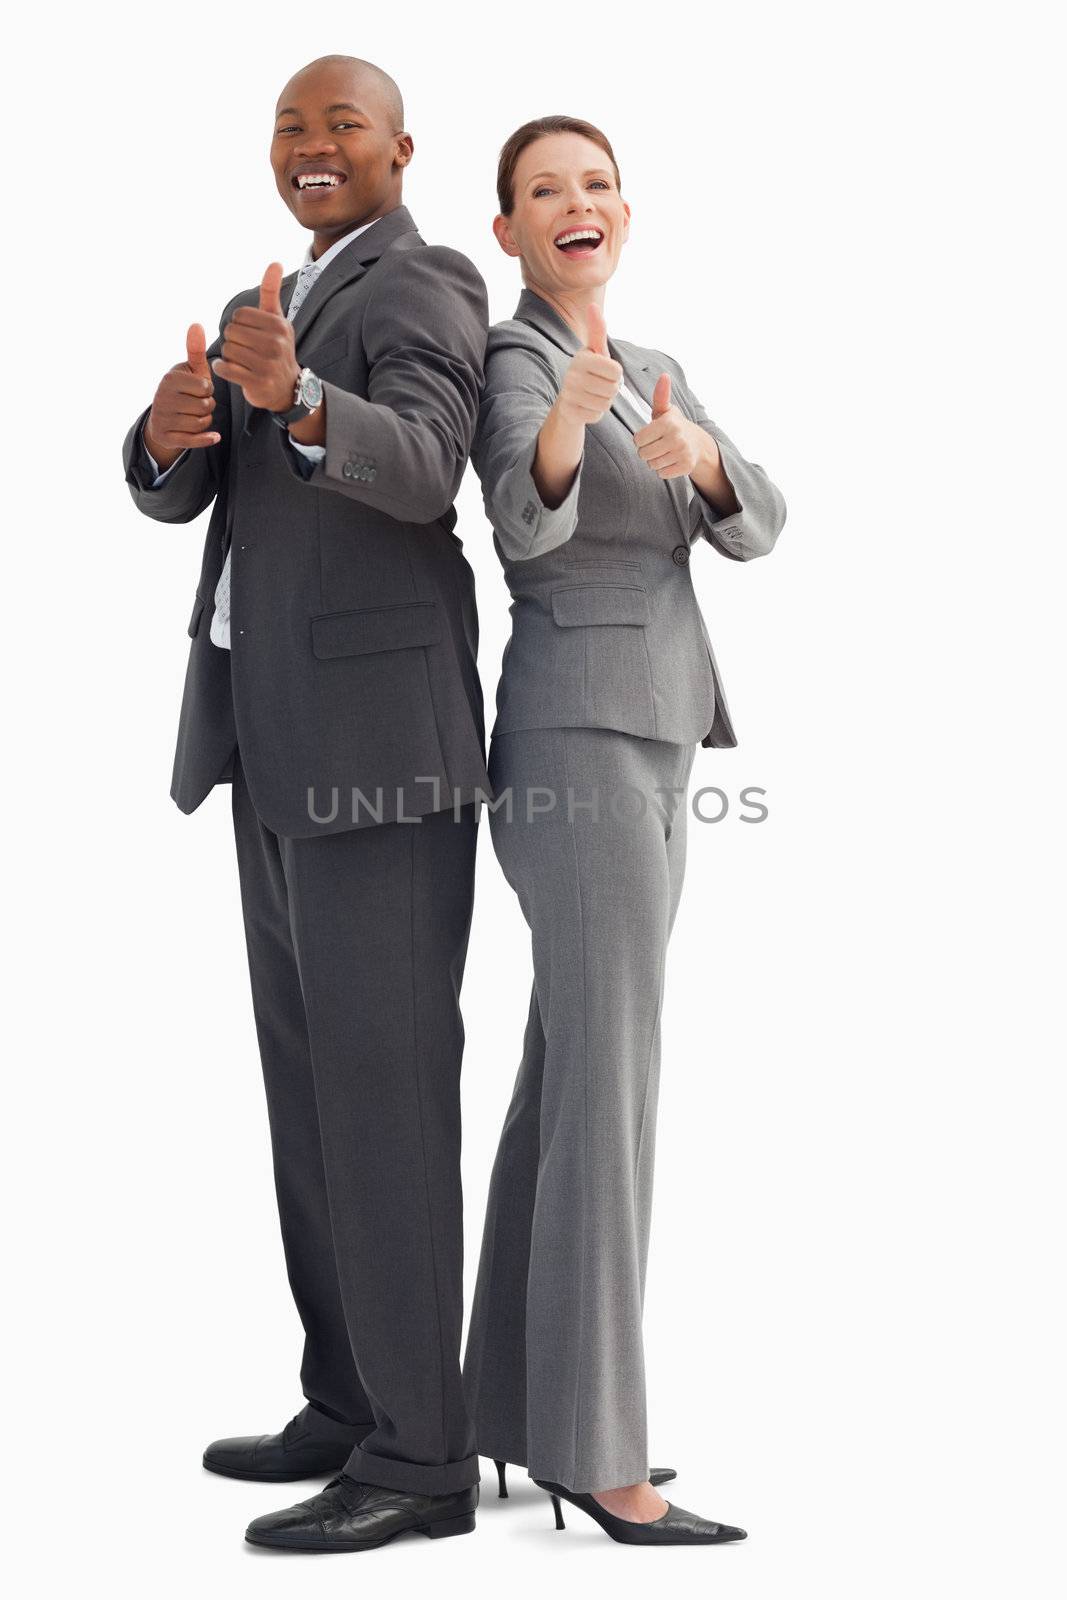 Smiling business people with their thumbs up